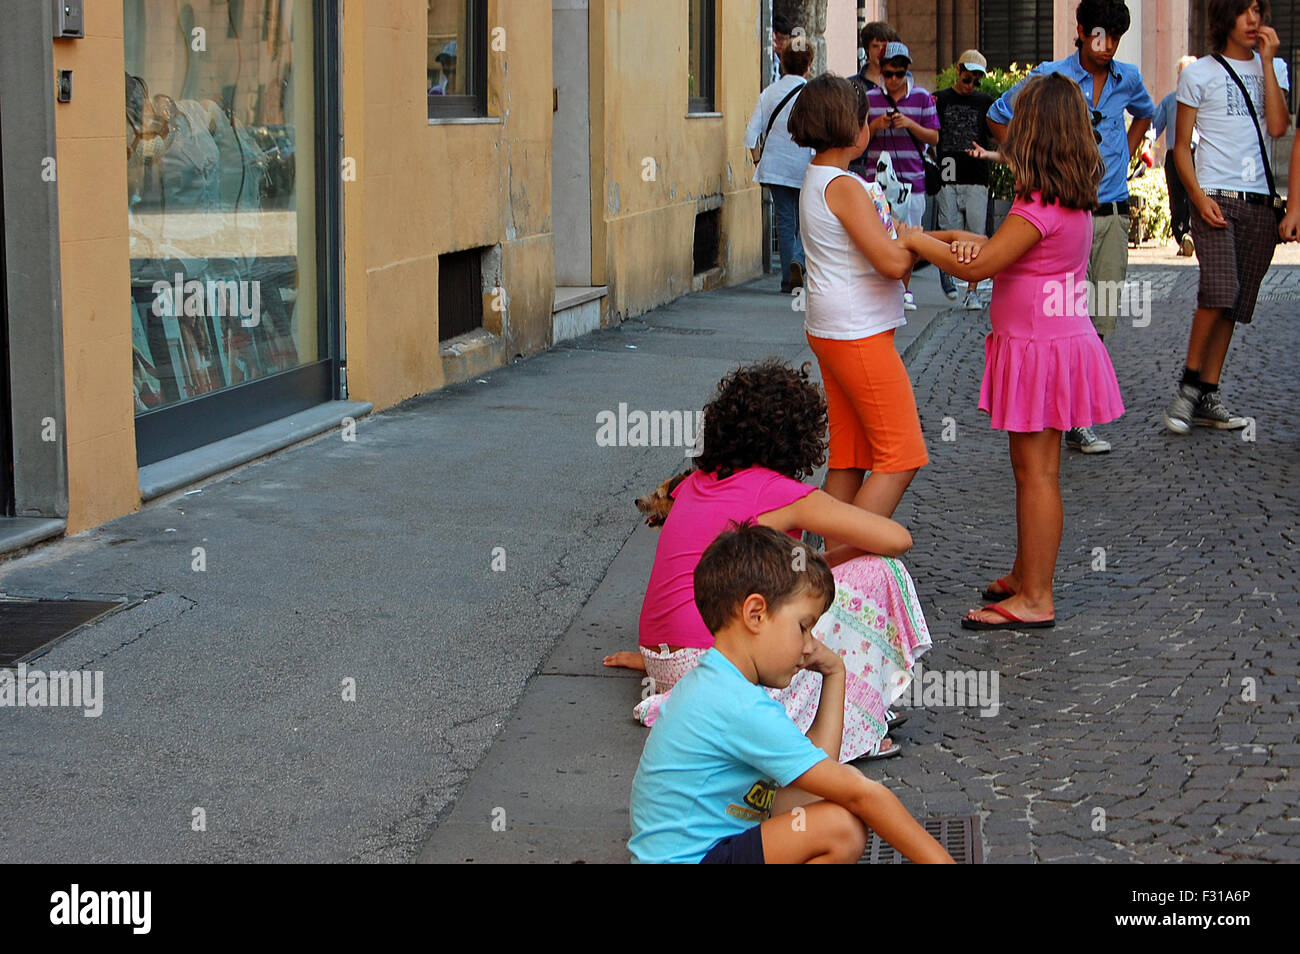 Italian children sitting and playing in a street in Vicenza, Italy. Stock Photo